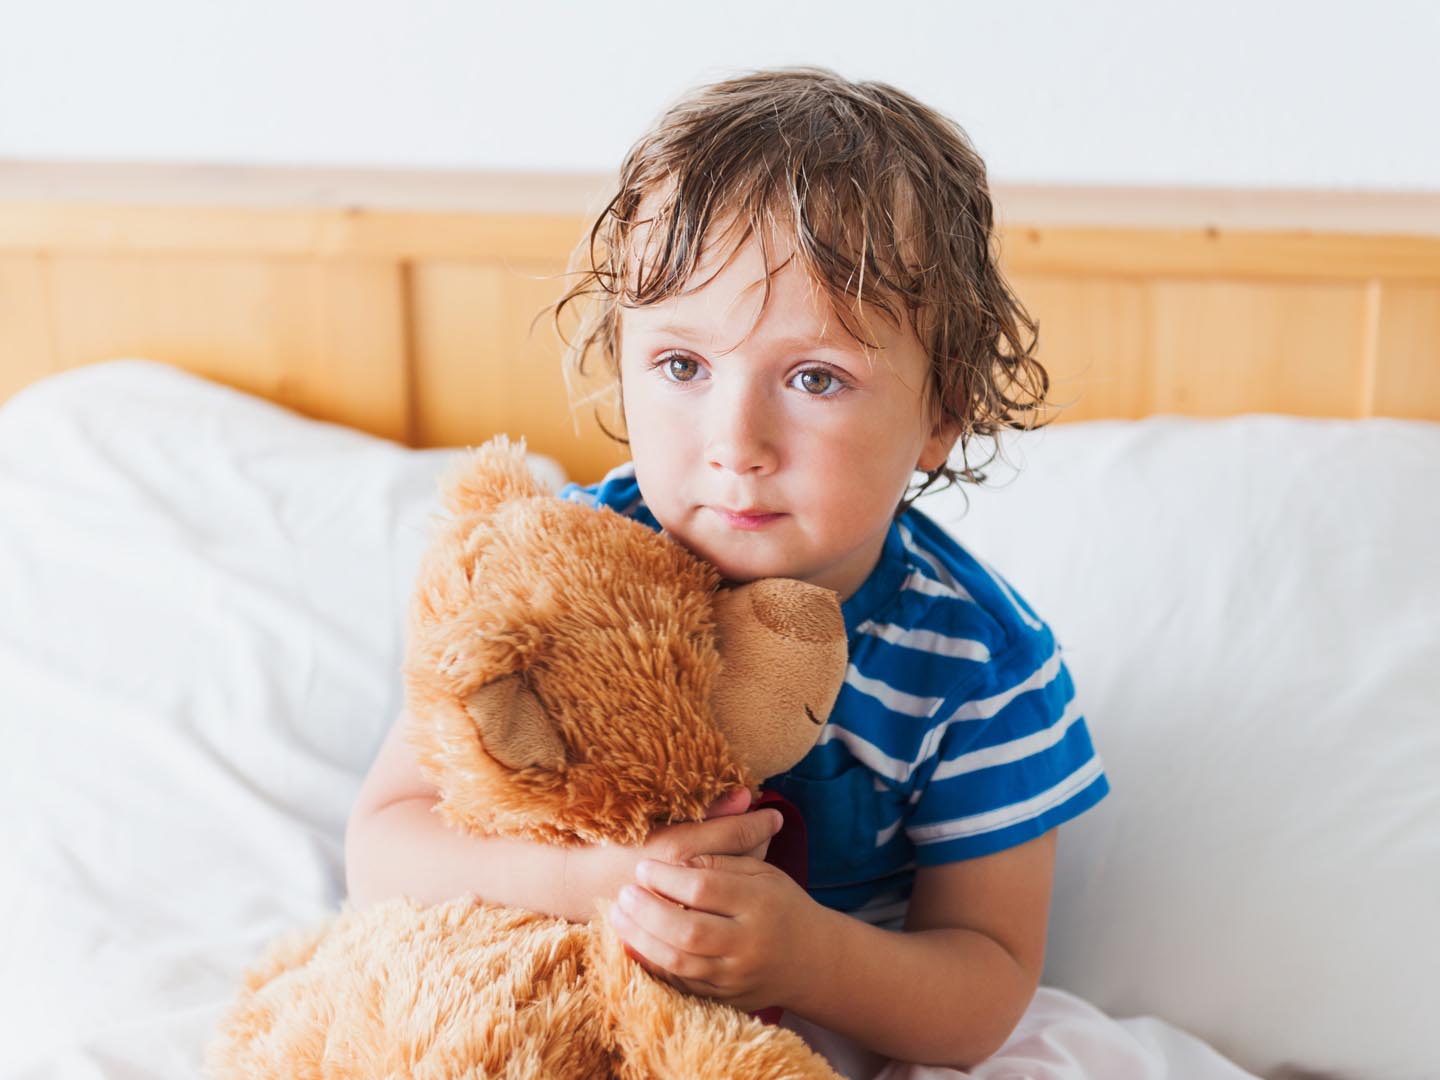 Cute toddler boy in a bed after shower, holding his teddy bear